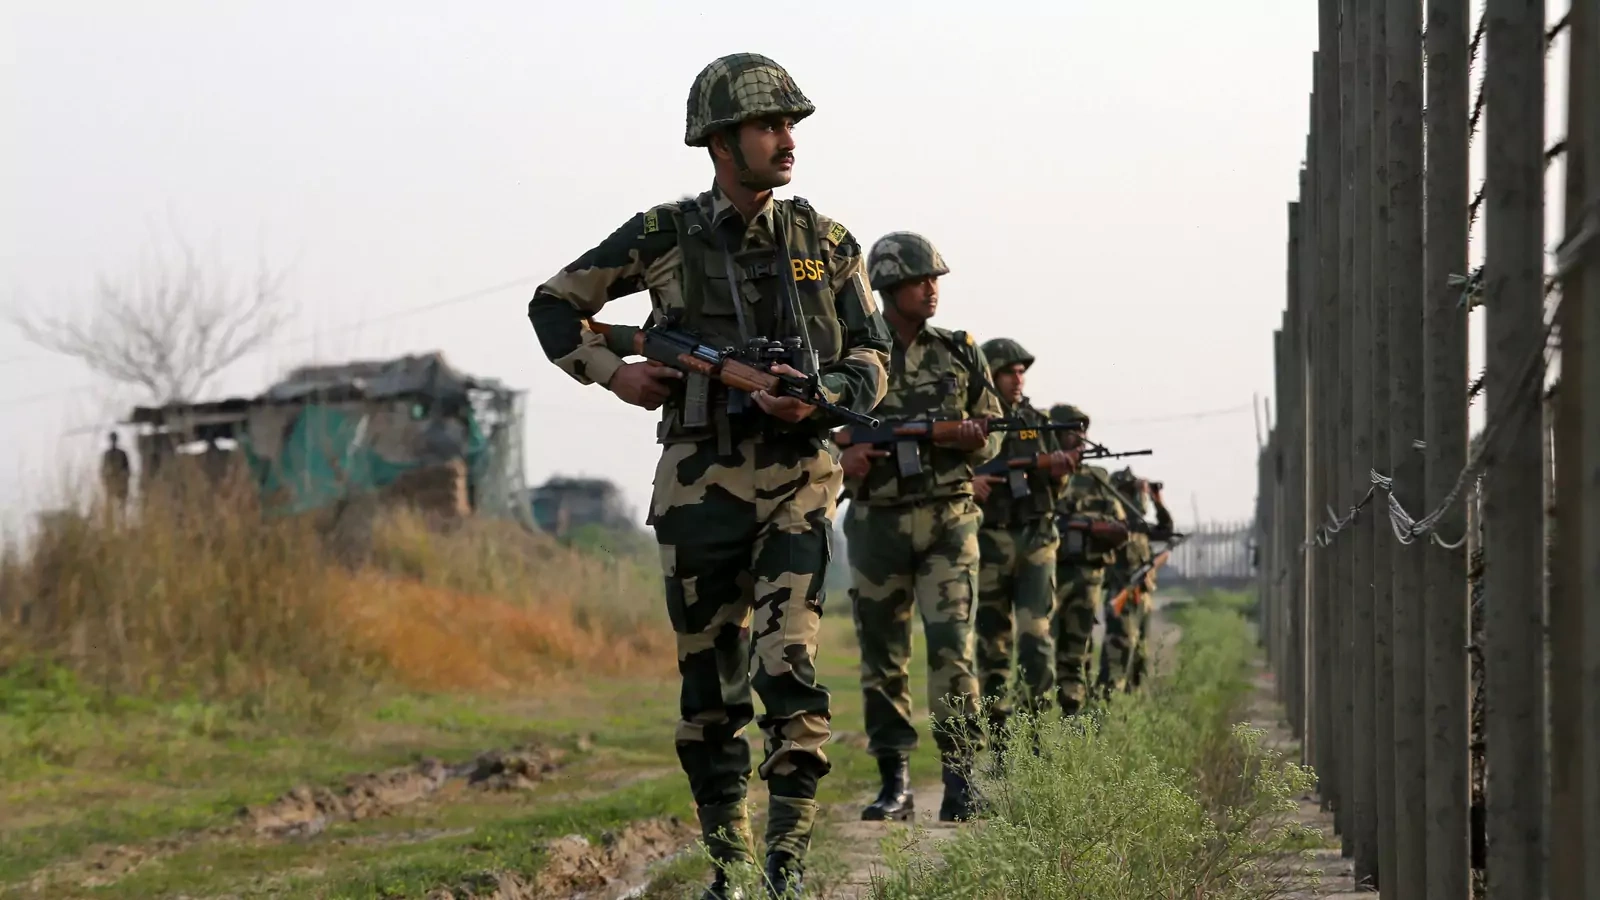 India's Border Security Force (BSF) soldiers patrol along the fenced border with Pakistan in Ranbir Singh Pura sector near Jammu February 26, 2019.